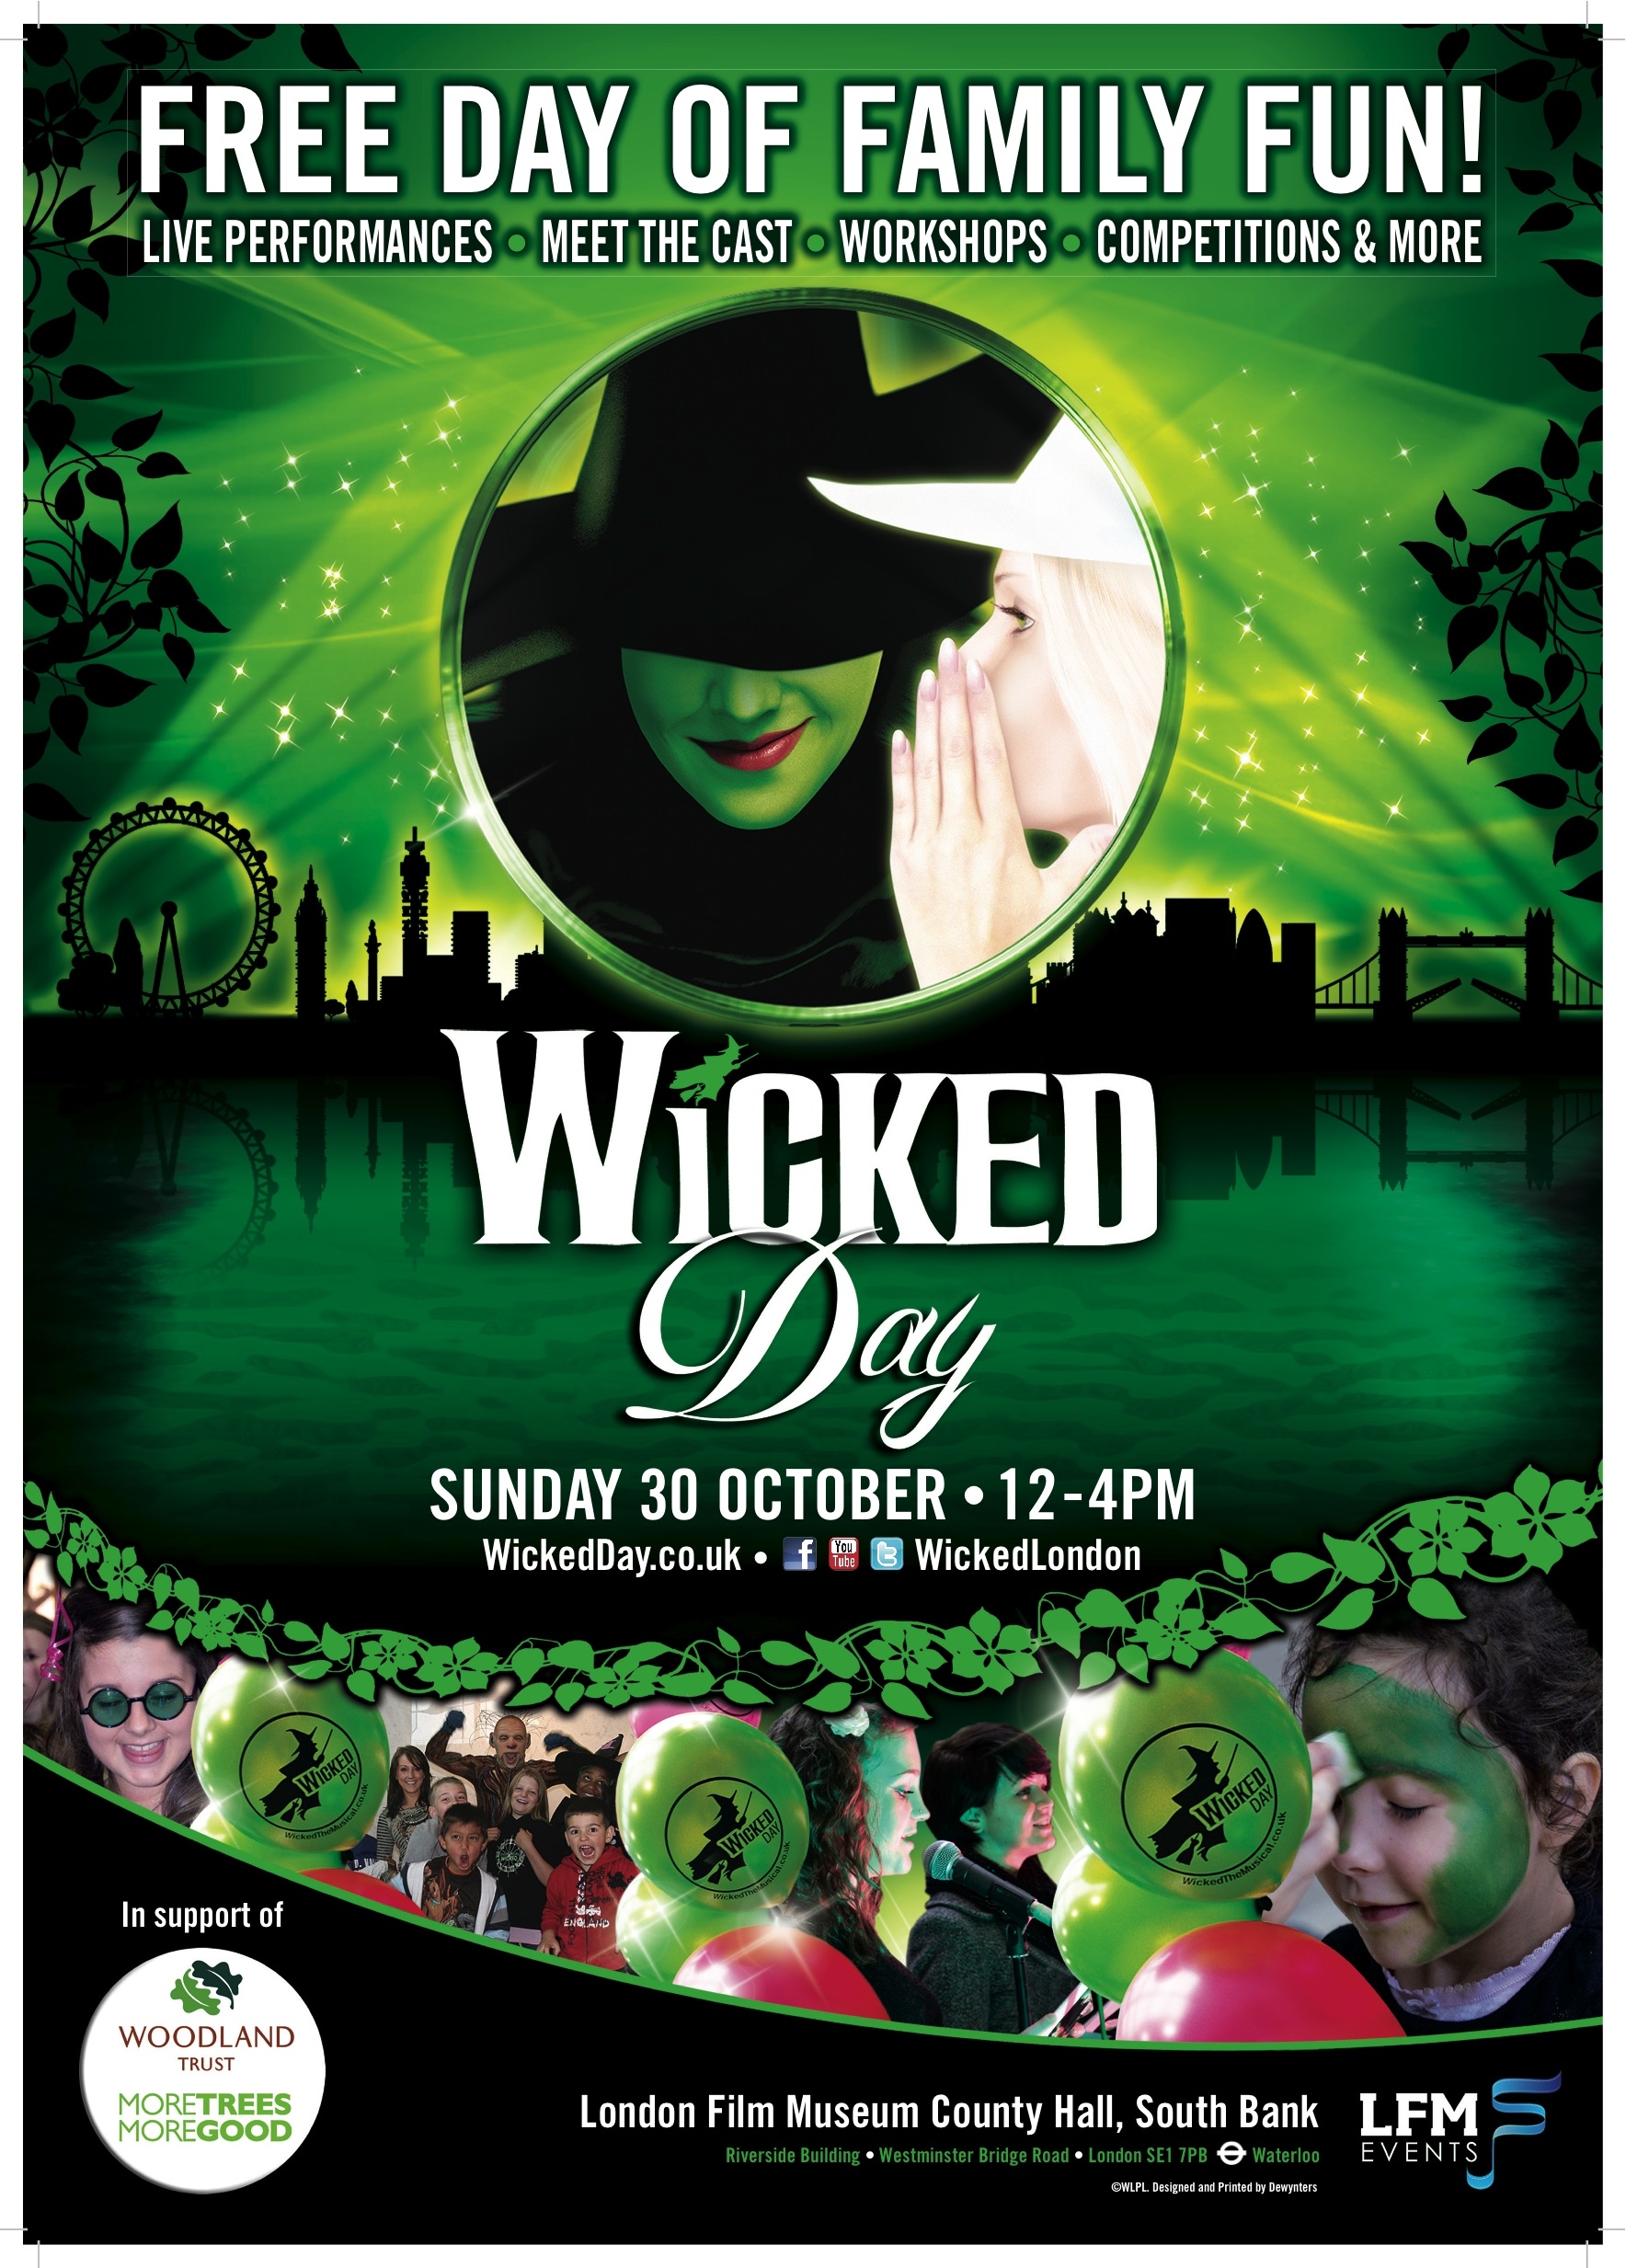 7-best-images-of-wicked-printable-poster-wicked-musical-quotes